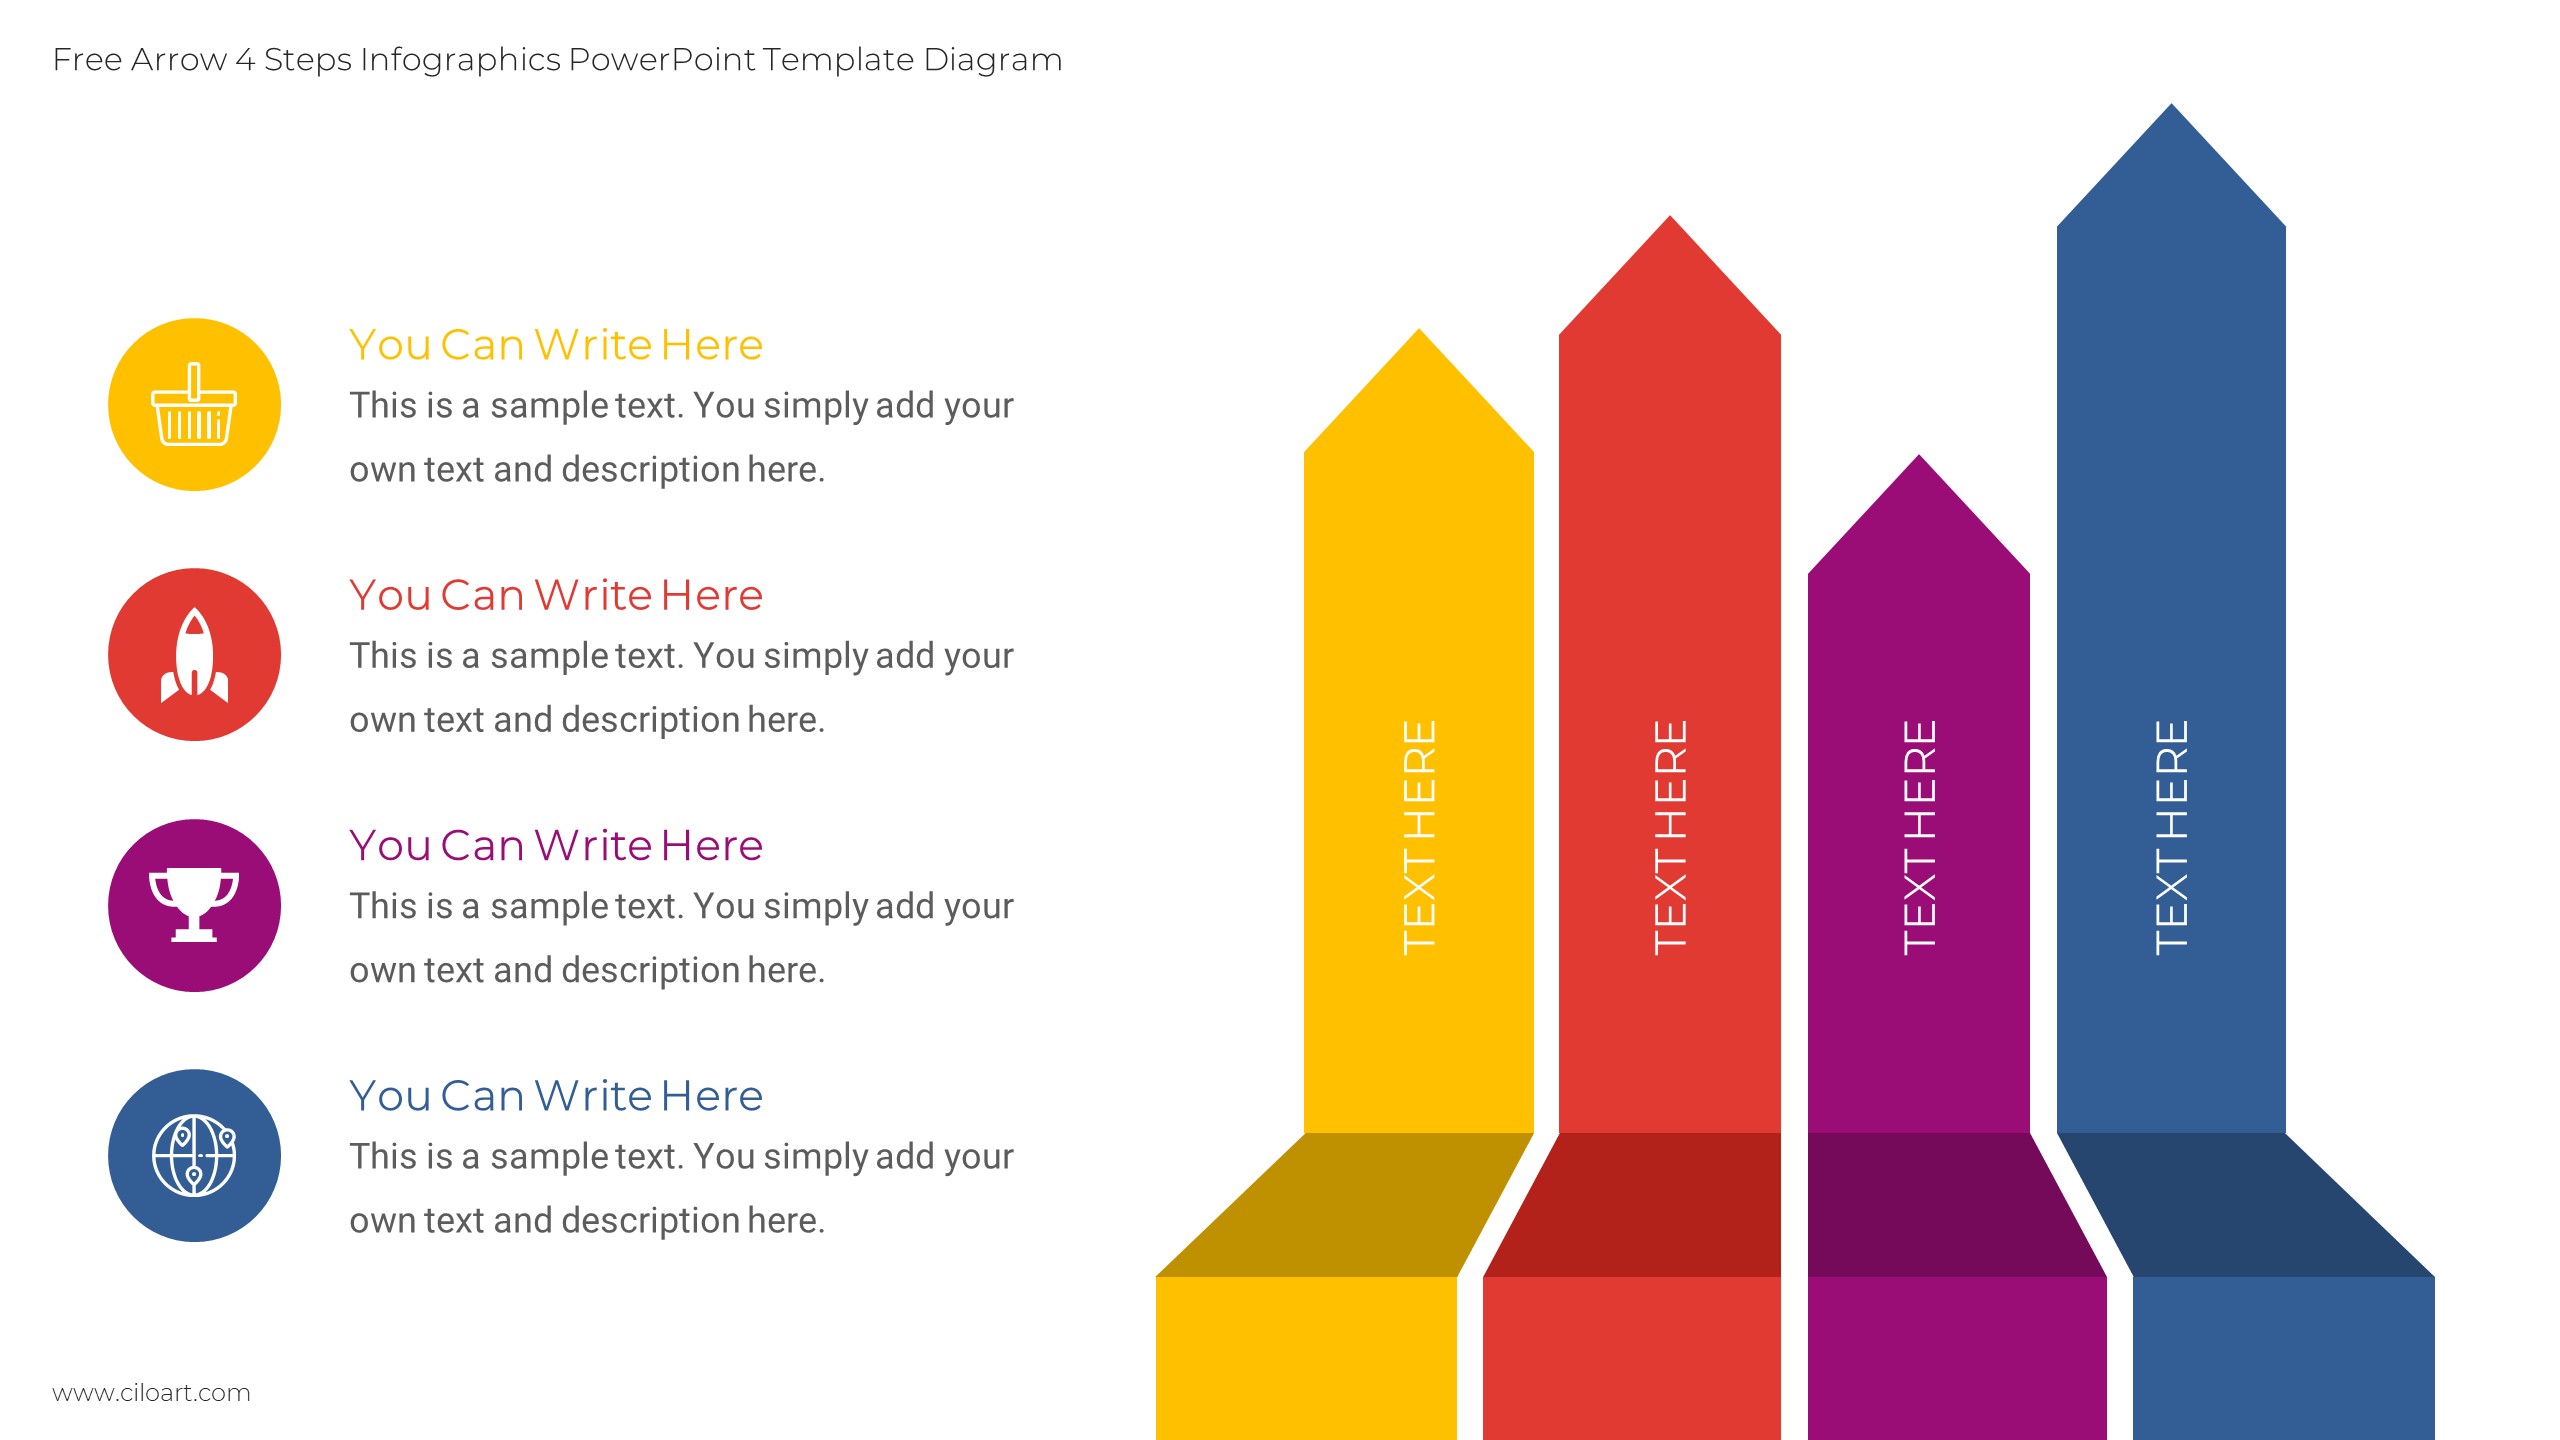 Free Arrow 4 Steps Infographics PowerPoint Template Diagram